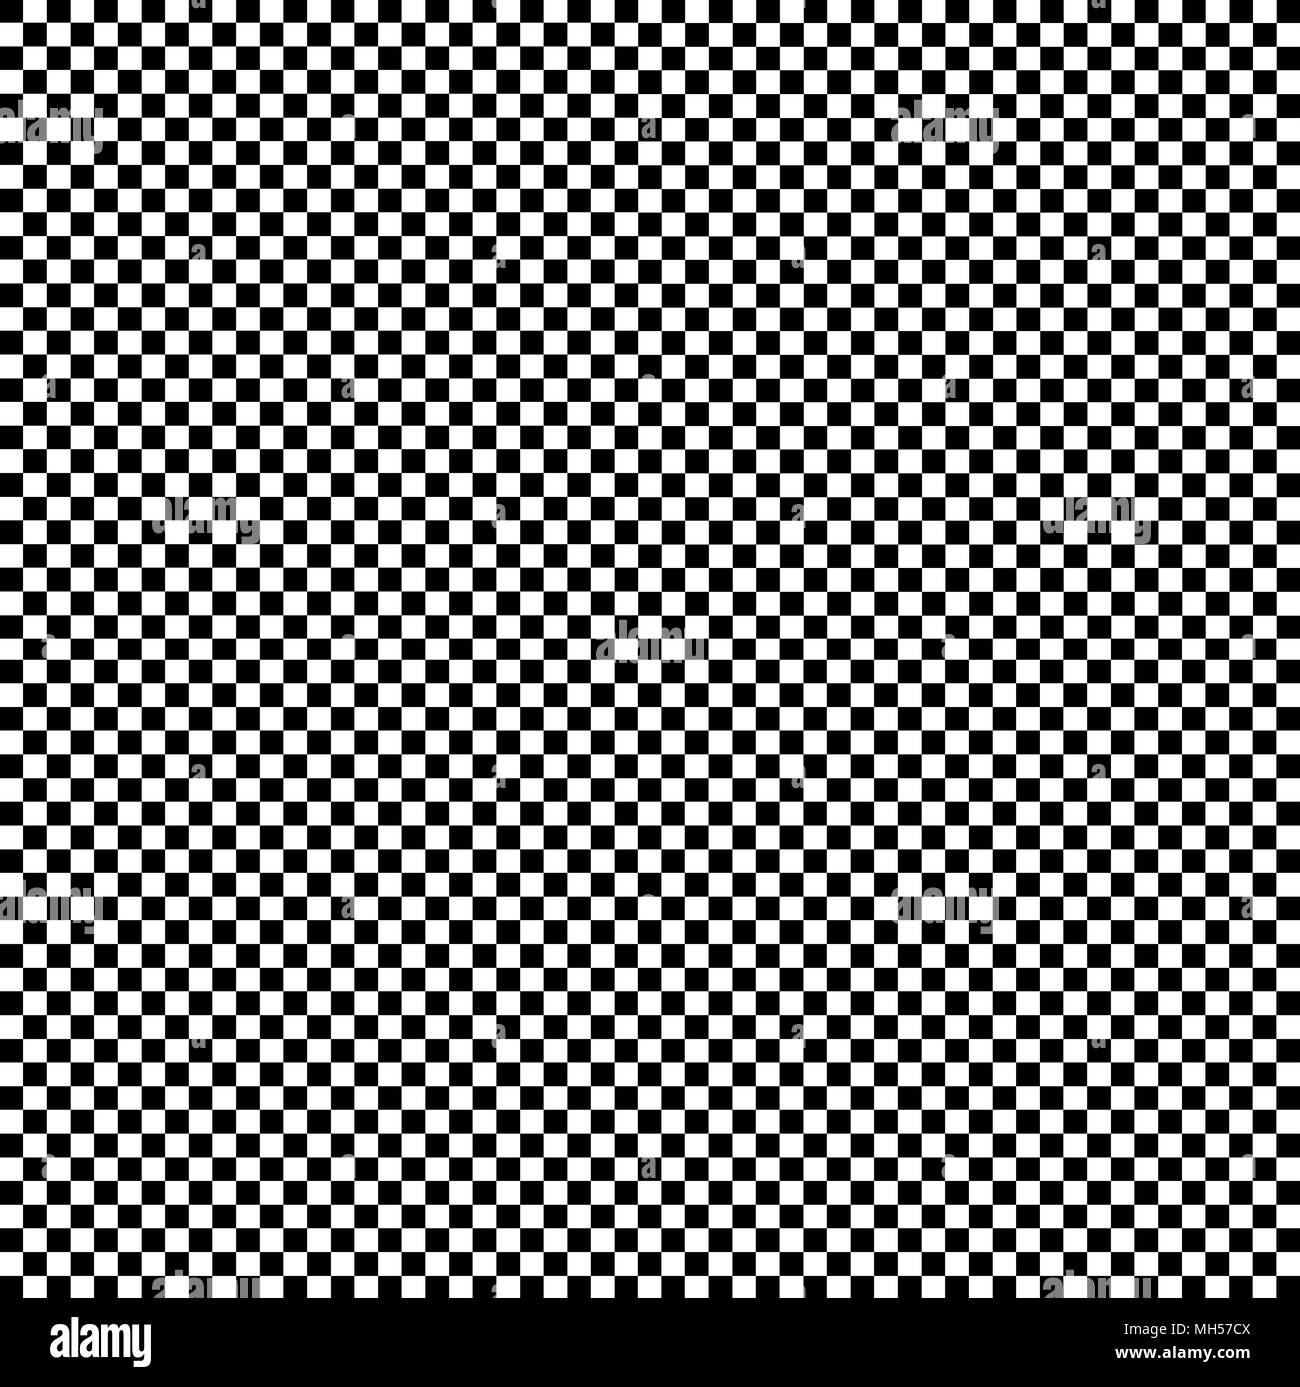 Simple seamless black white checkerboard pattern background. Stock Photo